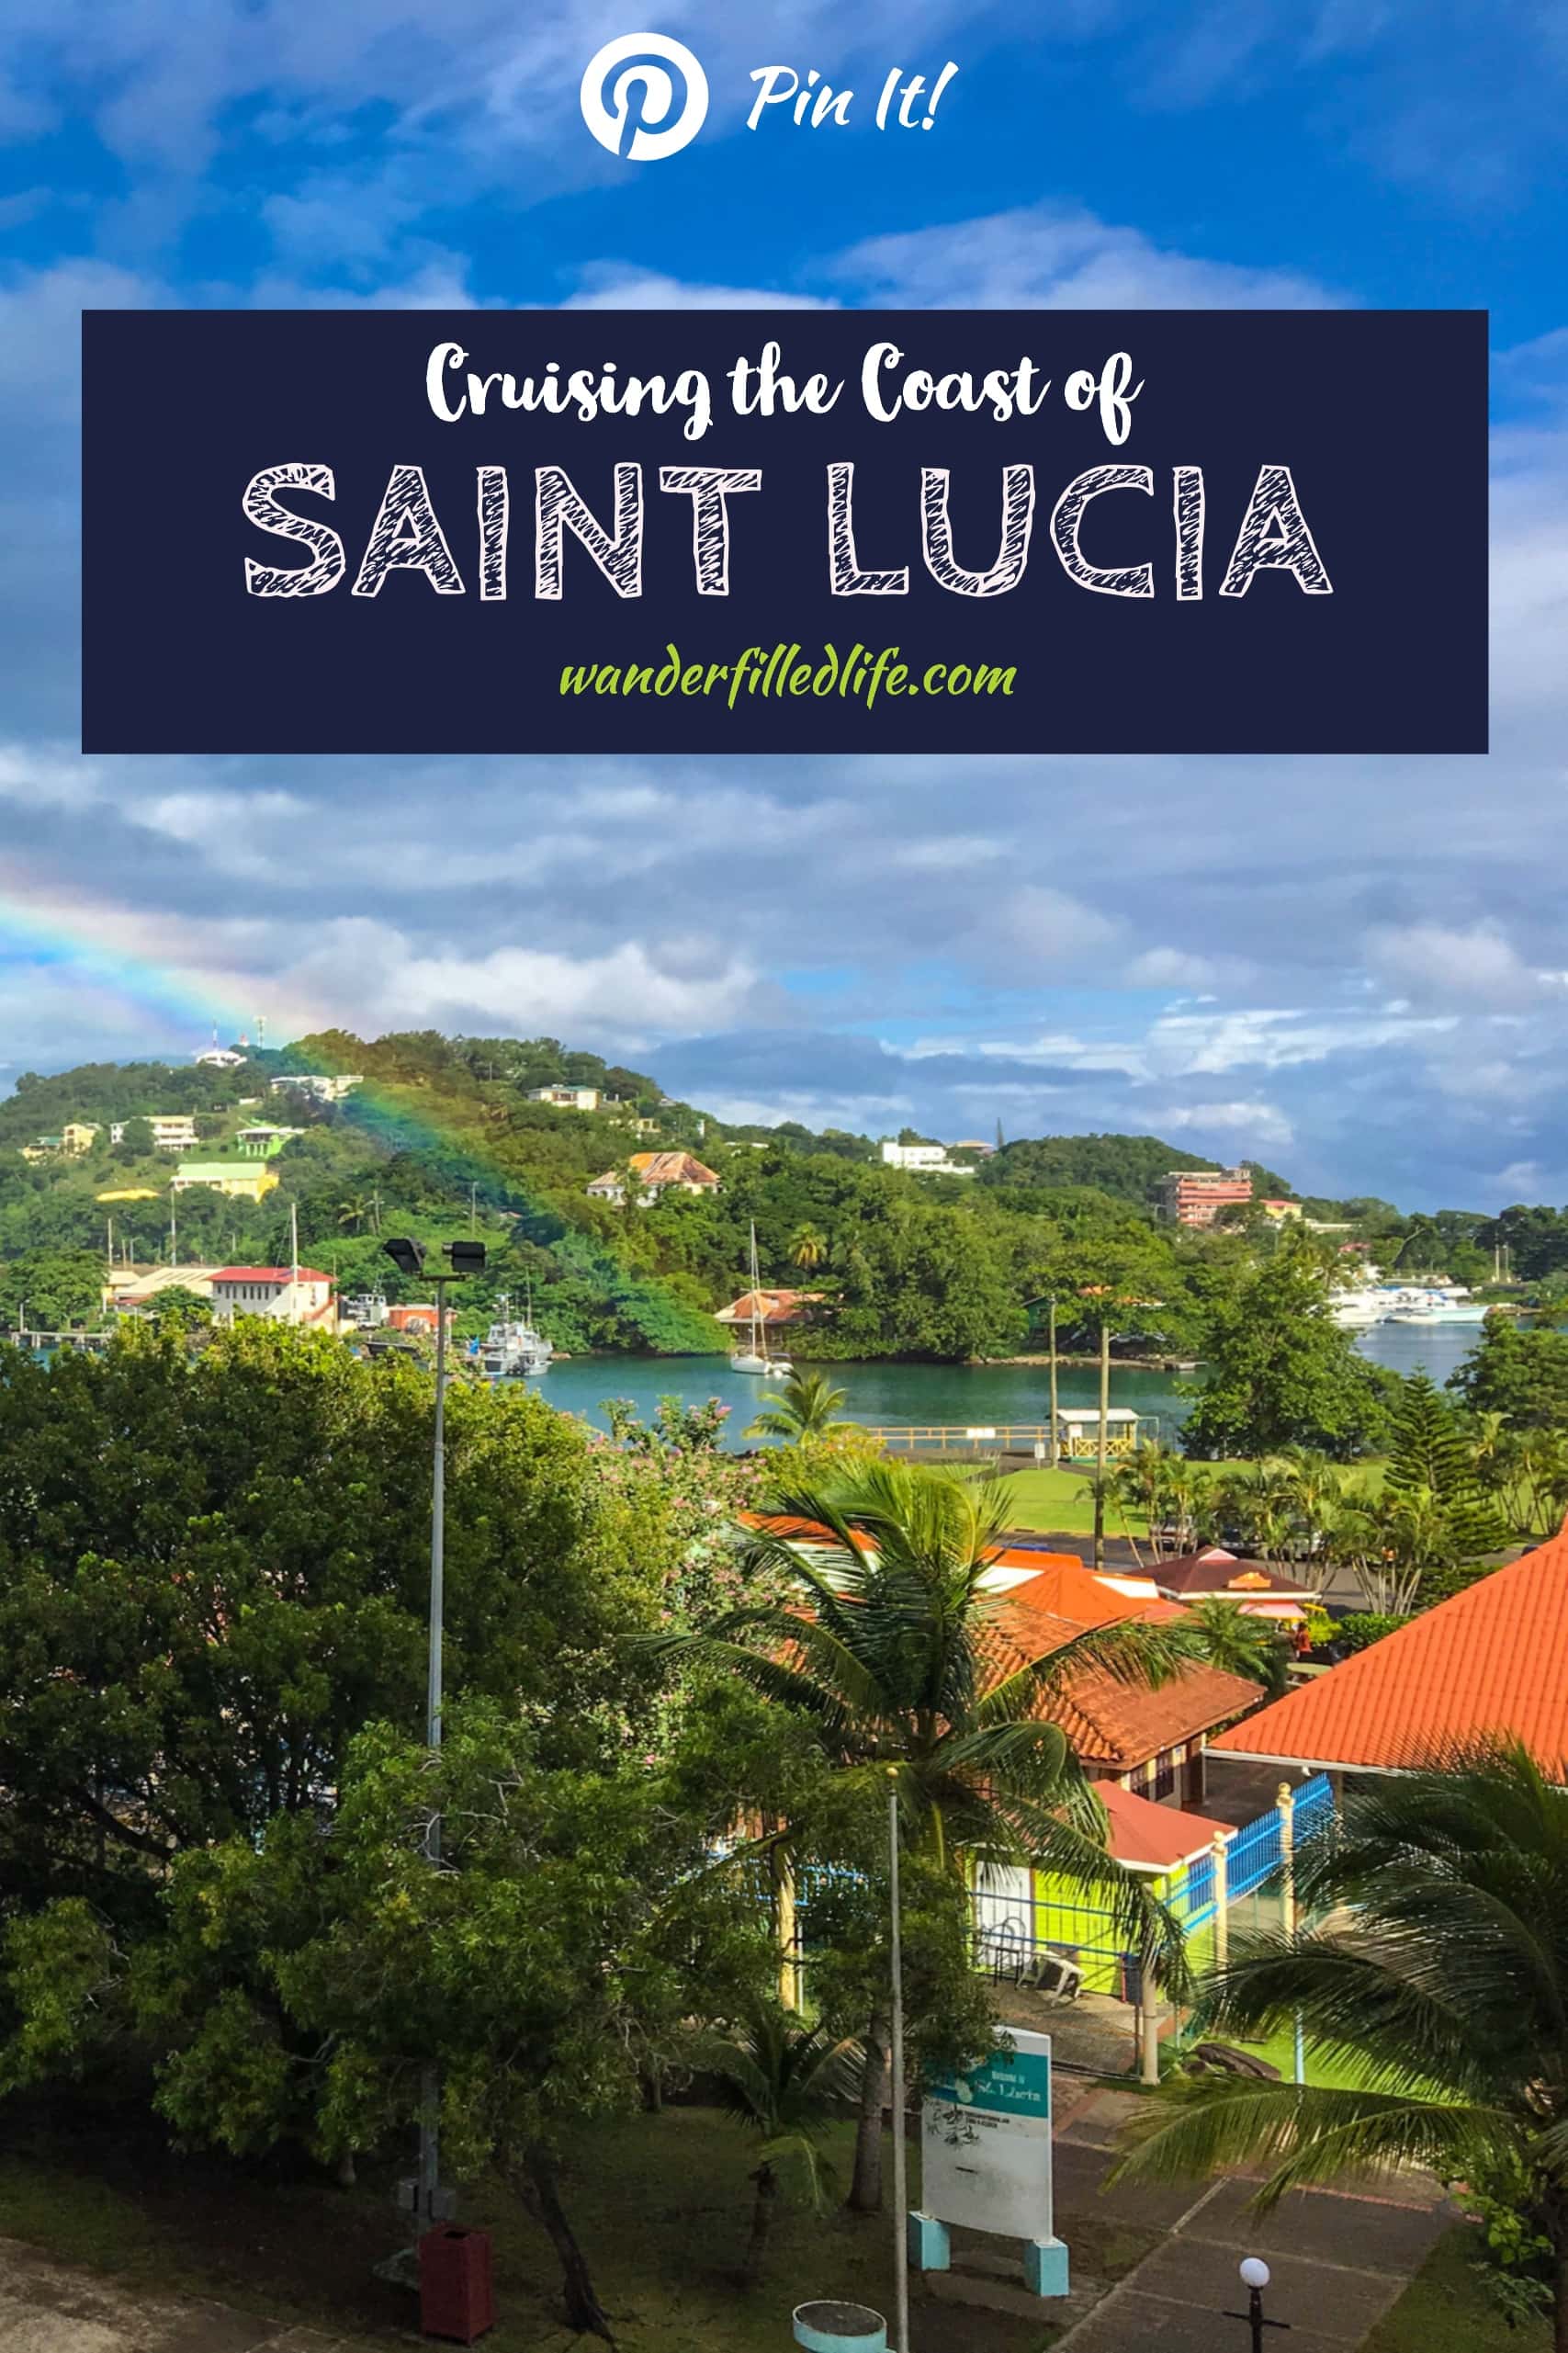 Our shore excursion report from Castries, Saint Lucia - a coastal cruise to the Pitons, including swimming and black sand beaches.